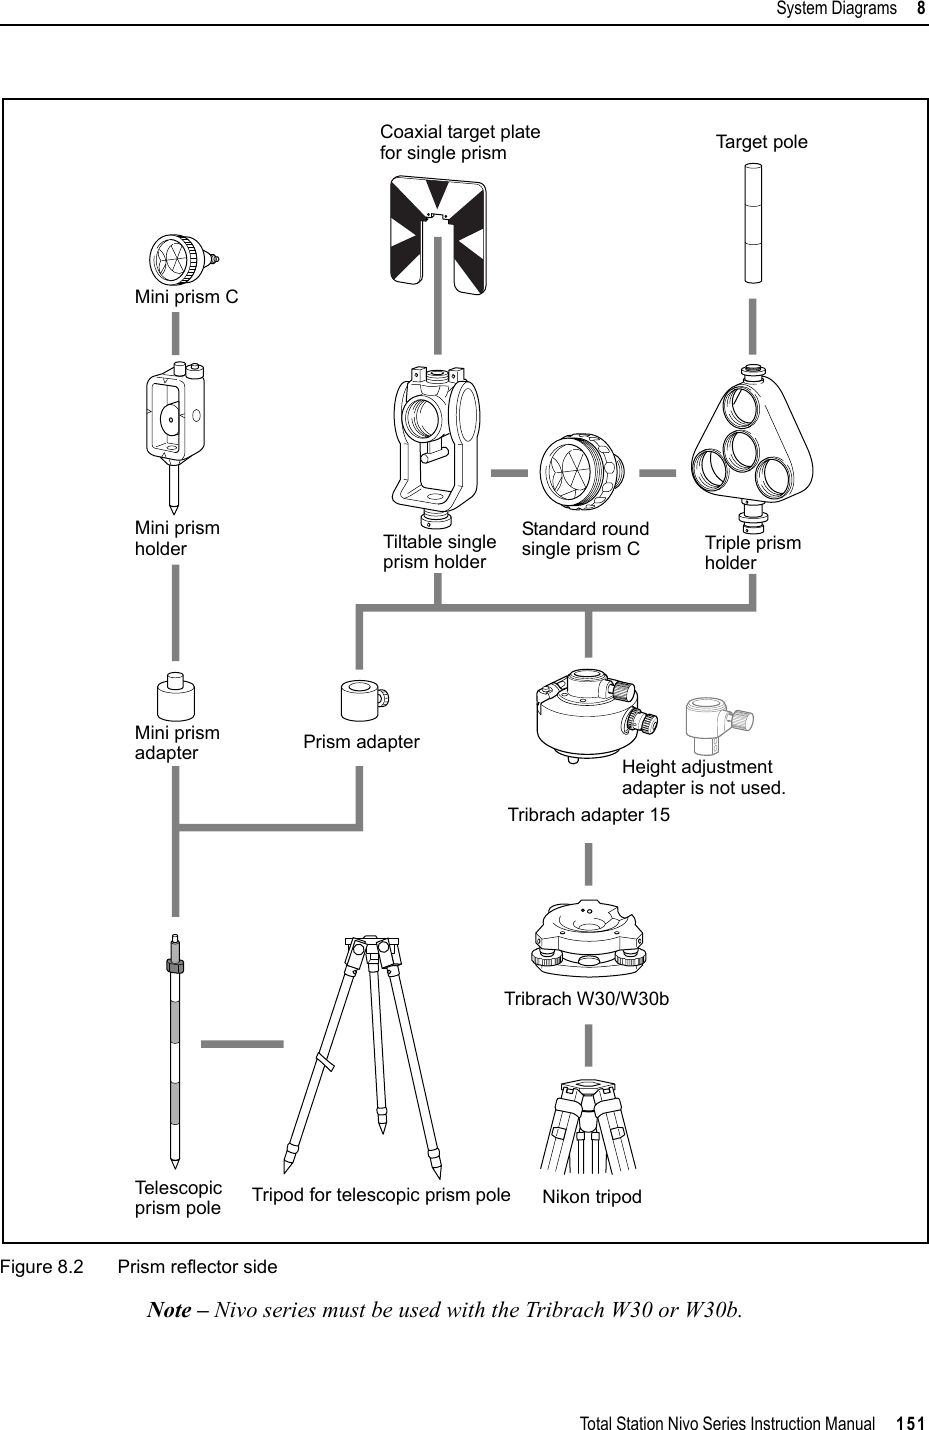 Total Station Nivo Series Instruction Manual     151System Diagrams     8Figure 8.2 Prism reflector sideNote – Nivo series must be used with the Tribrach W30 or W30b.Mini prism CMini prismholderMini prismadapterTelescopicprism poleCoaxial target platefor single prismTiltable singleprism holderPrism adapterTripod for telescopic prism poleStandard roundsingle prism CTa r ge t  p o l eTriple prismholderTribrach adapter 15Nikon tripodTribrach W30/W30bHeight adjustment adapter is not used.